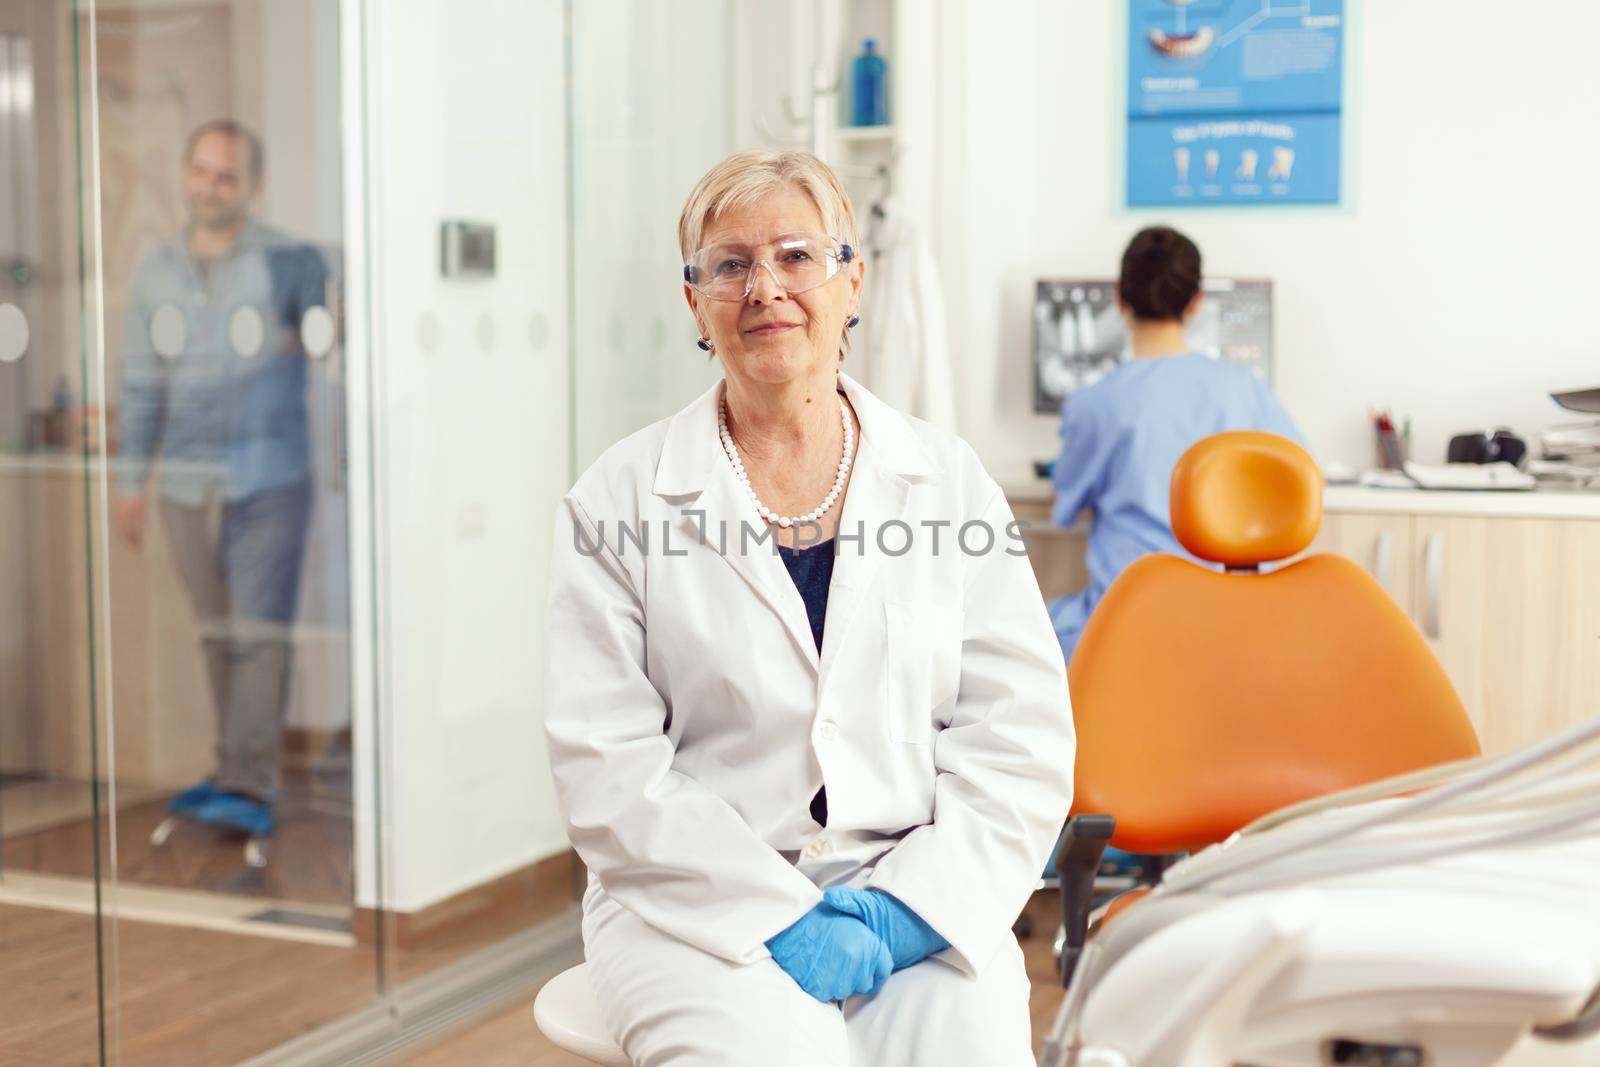 Orthodontist senior in medical uniform sitting on chair looking into camera by DCStudio